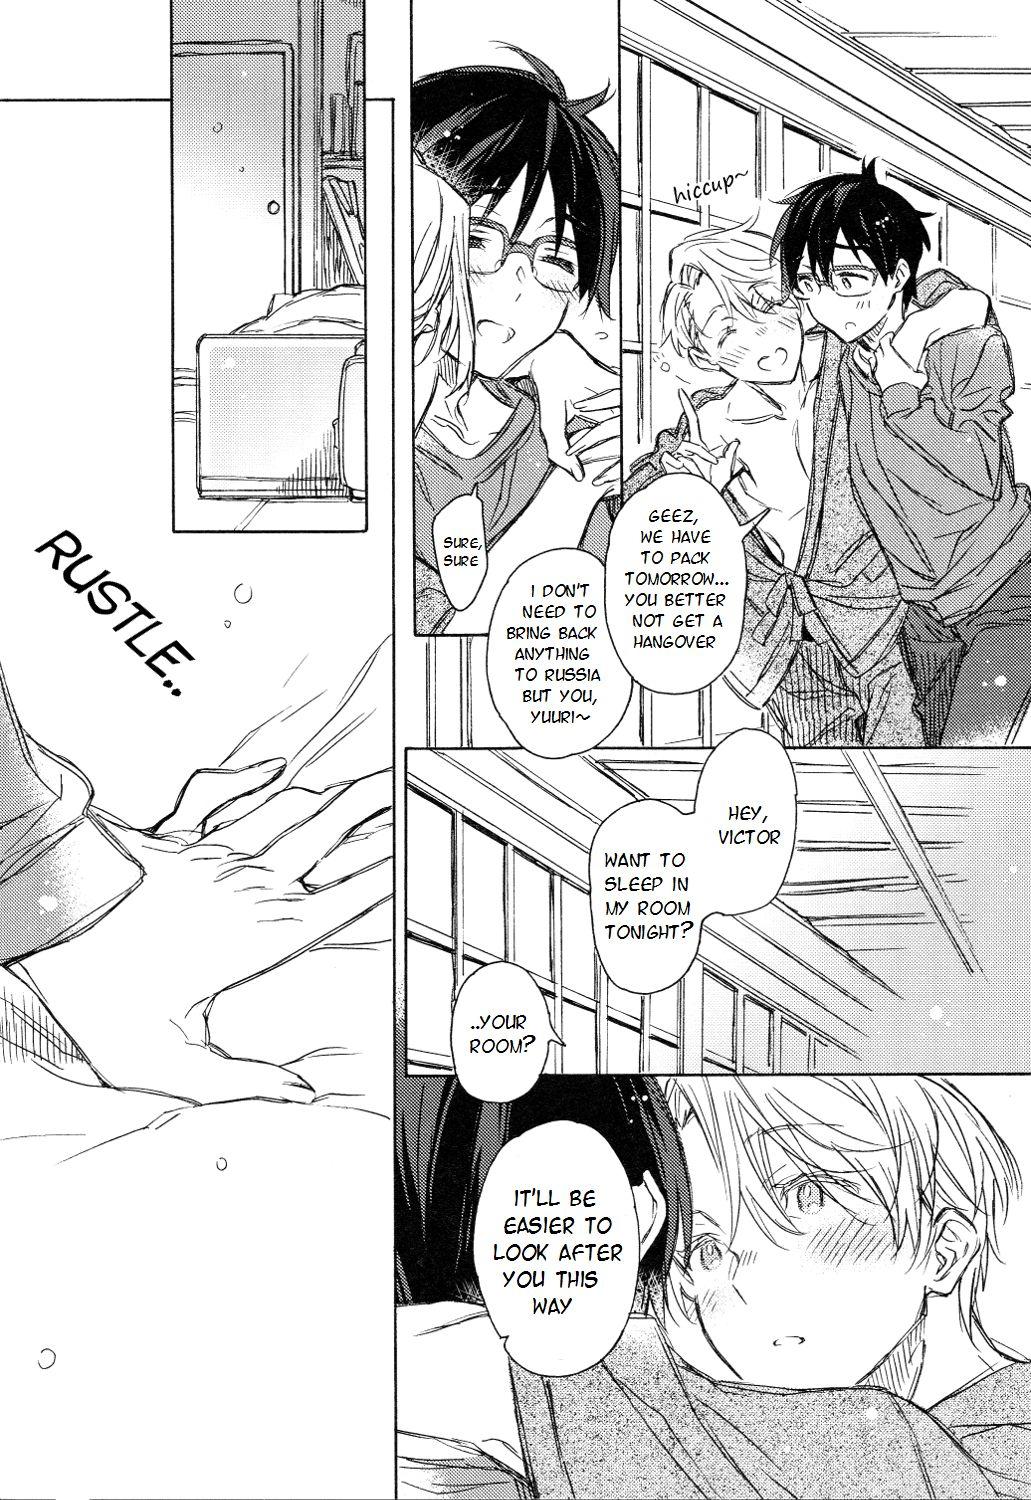 Eurosex BRAND NEW DAY,BRAND NEW LIFE - Yuri on ice Pussy Eating - Page 7